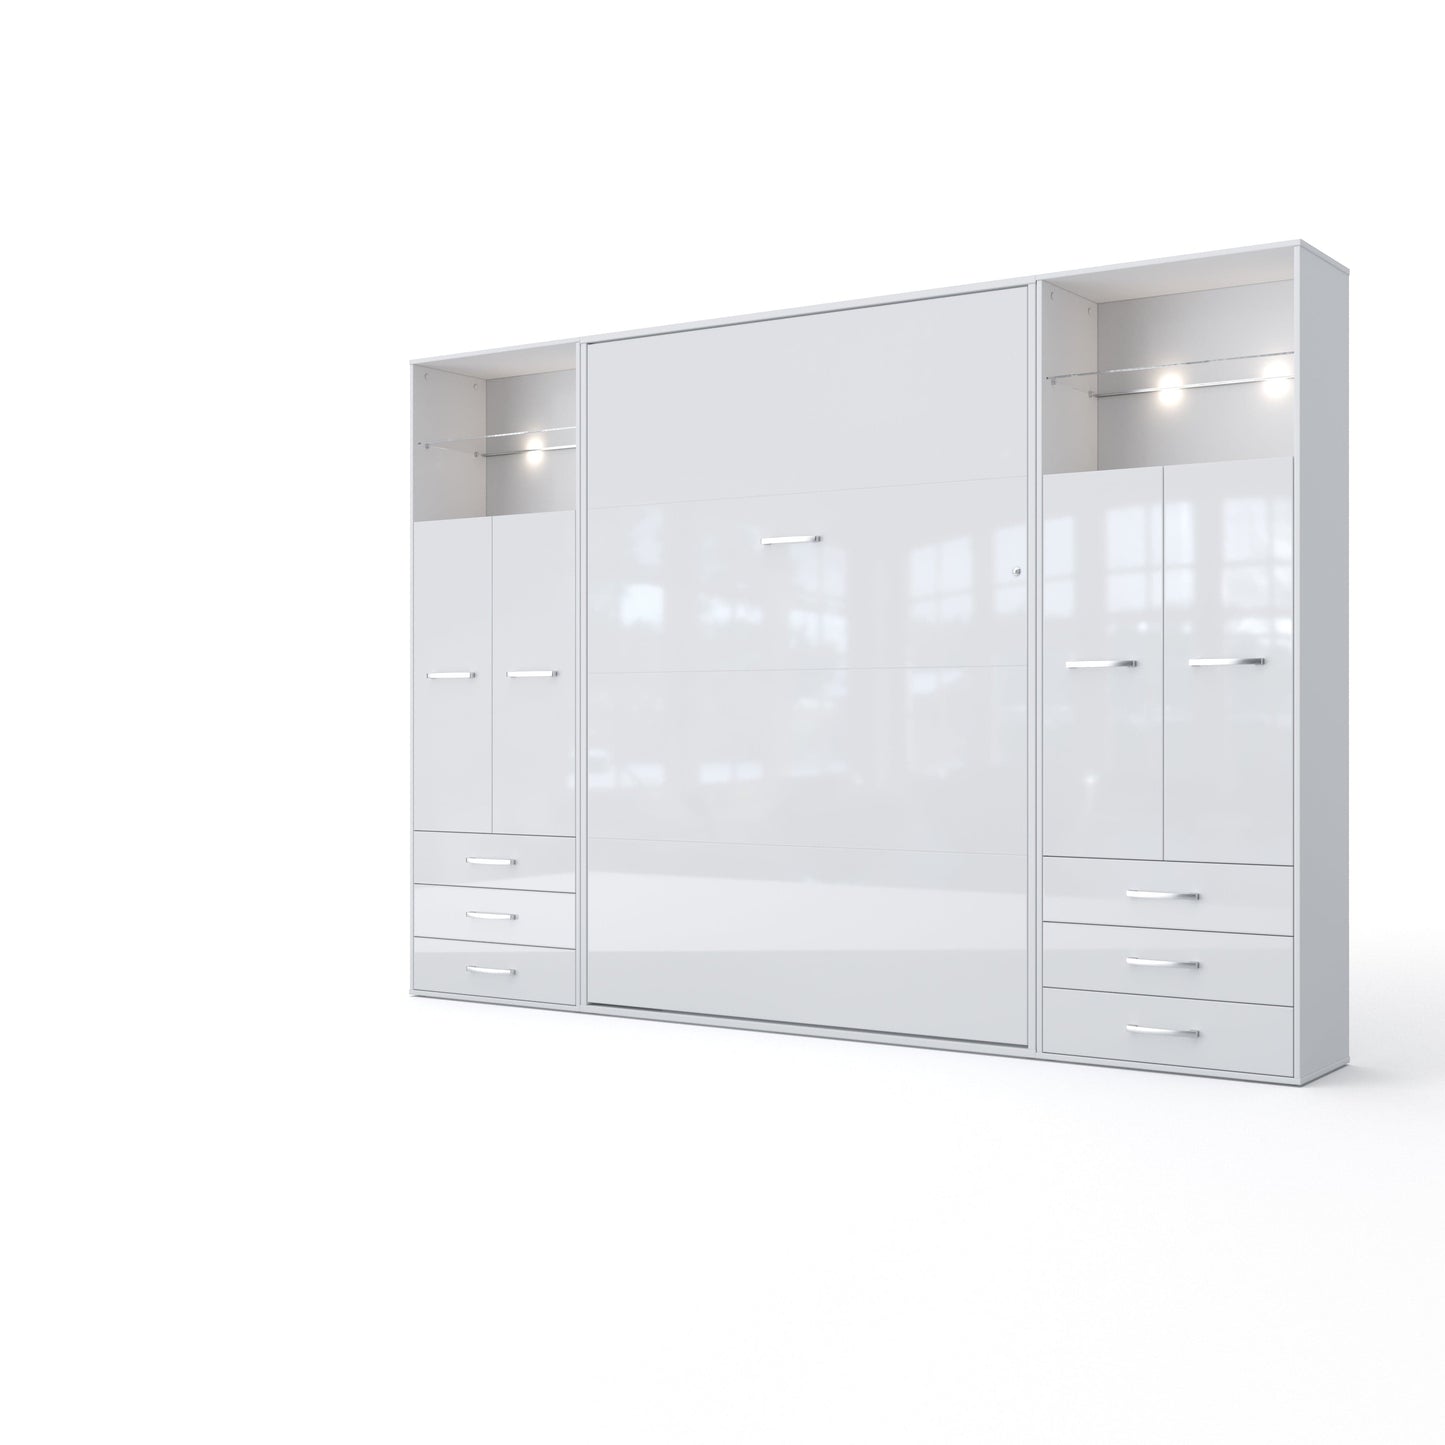 Maxima House Maxima House Vertical Wall Bed Invento, European Twin Size with 2 cabinets White/White IN90V-10W